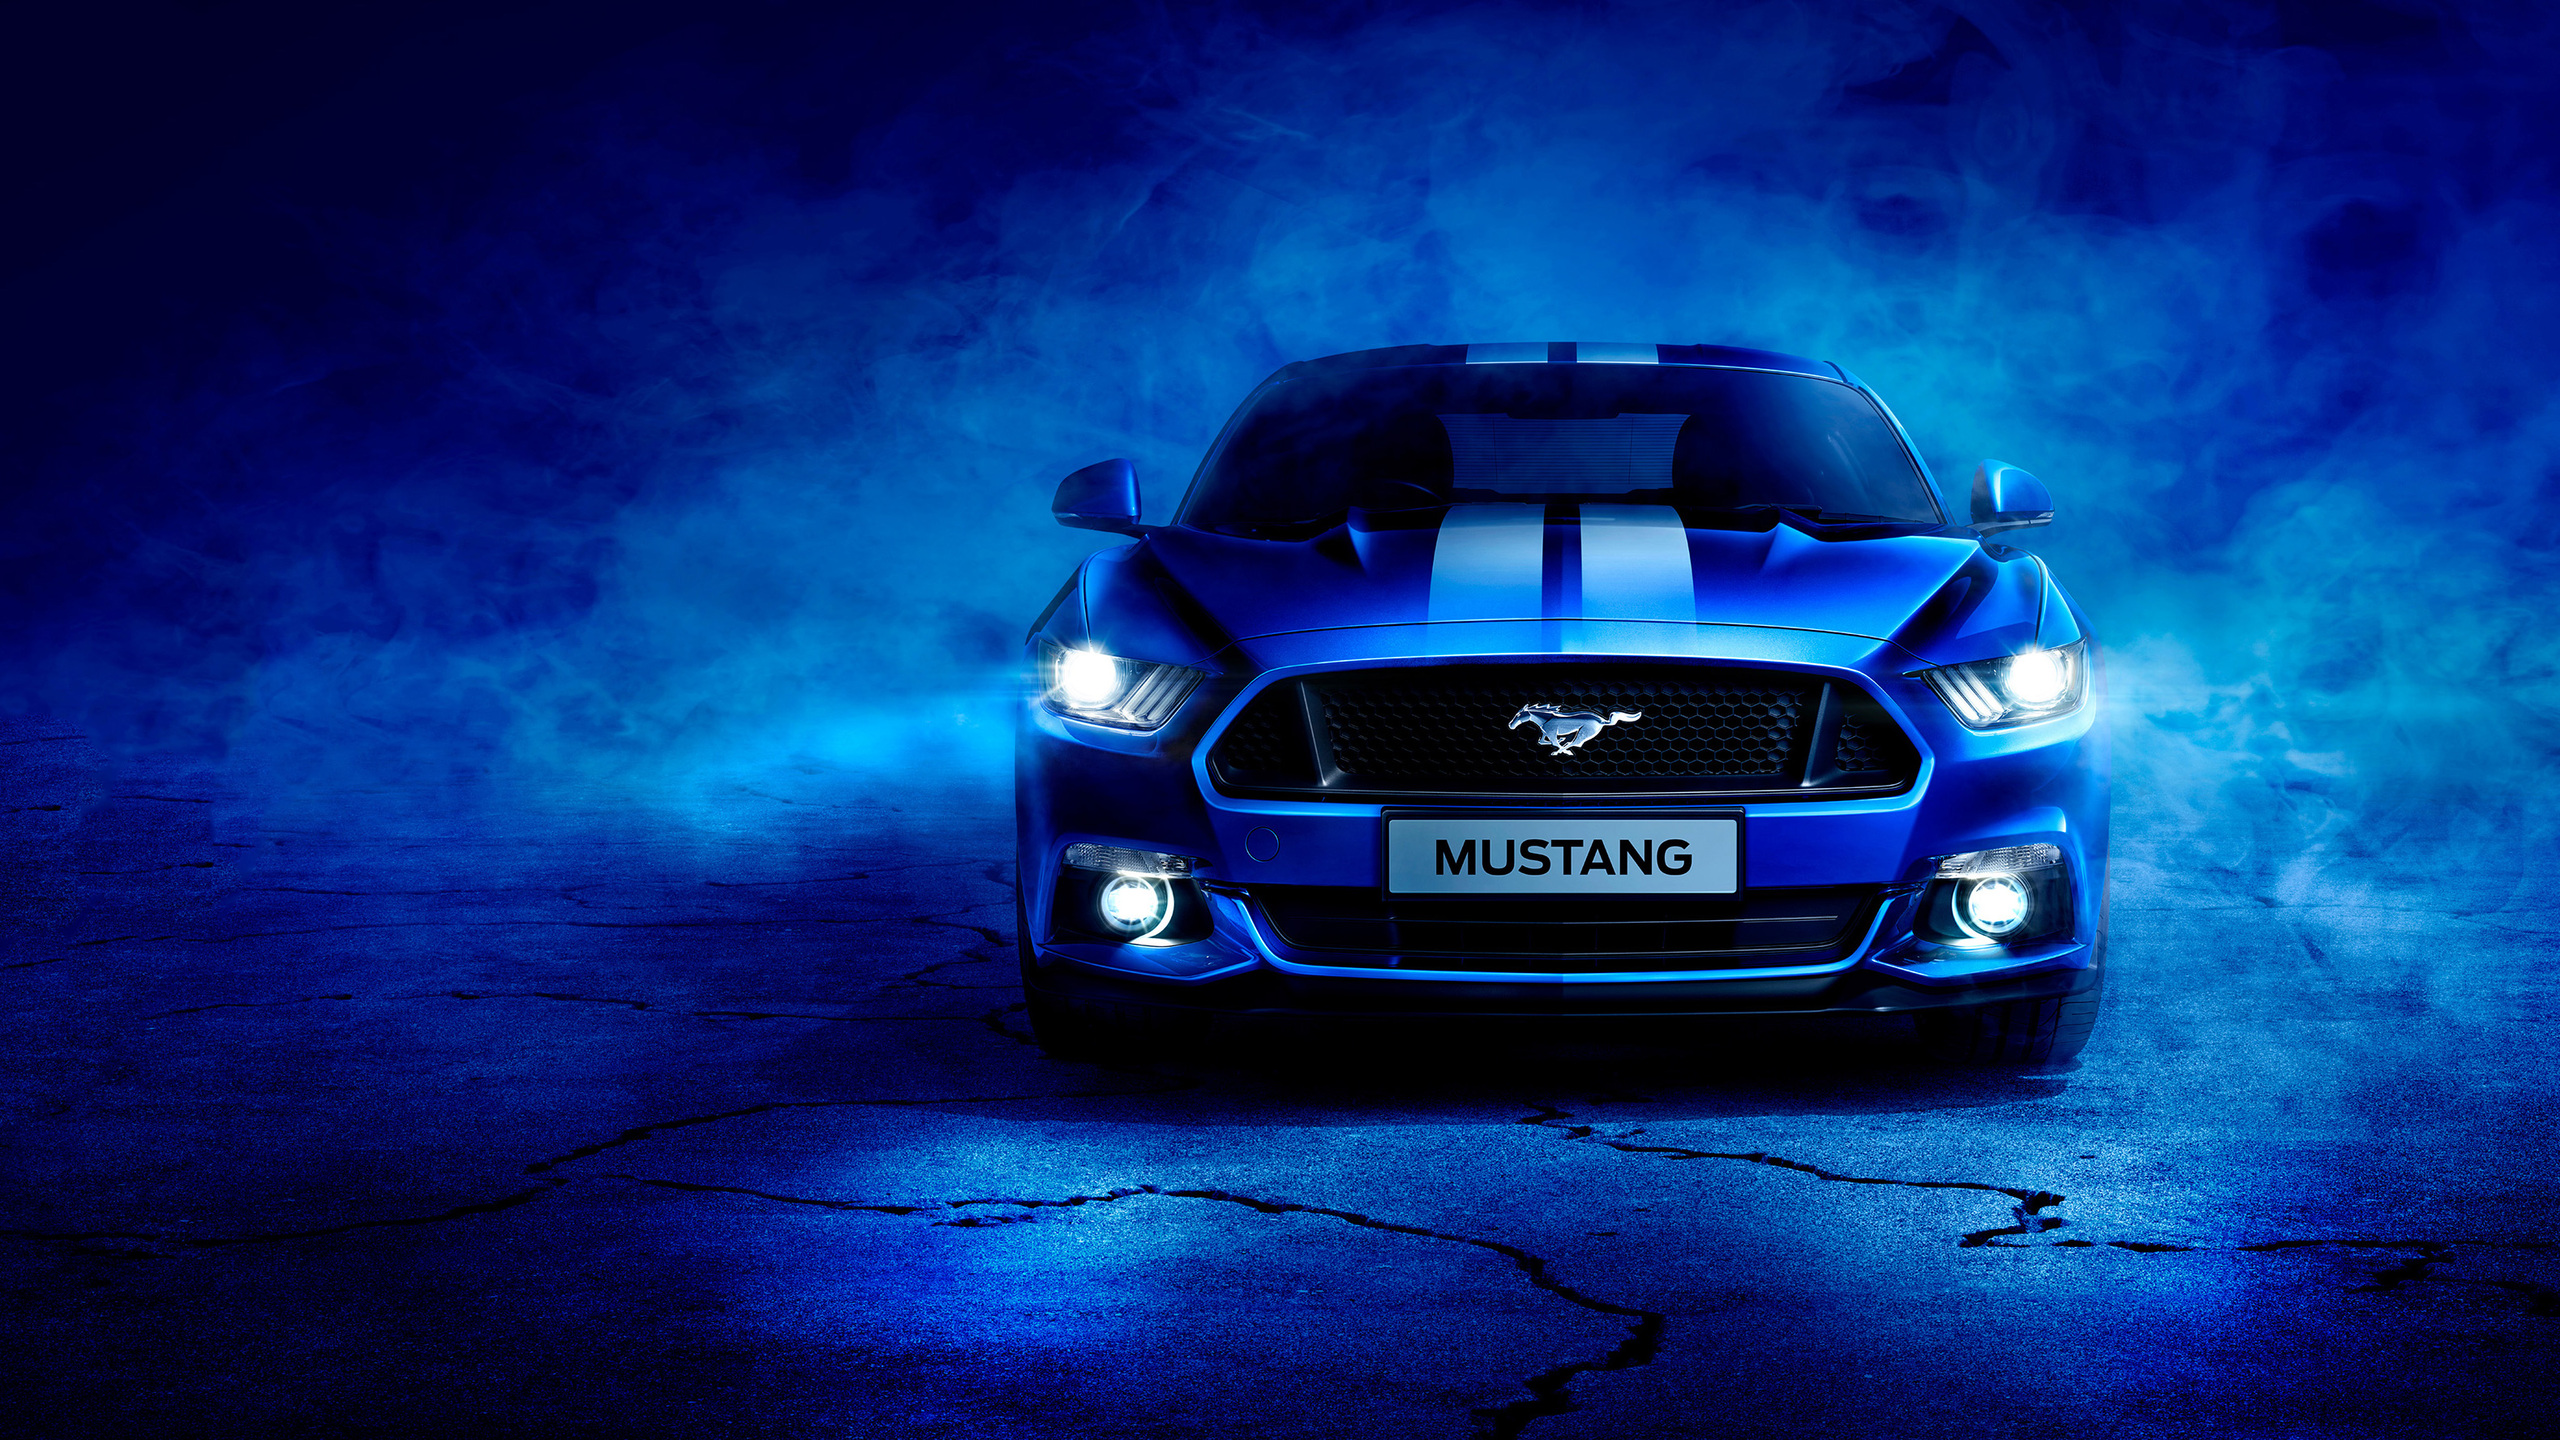 2560x1440 Blue Ford Mustang 1440p Resolution Hd 4k Wallpapers Images Backgrounds Photos And Pictures